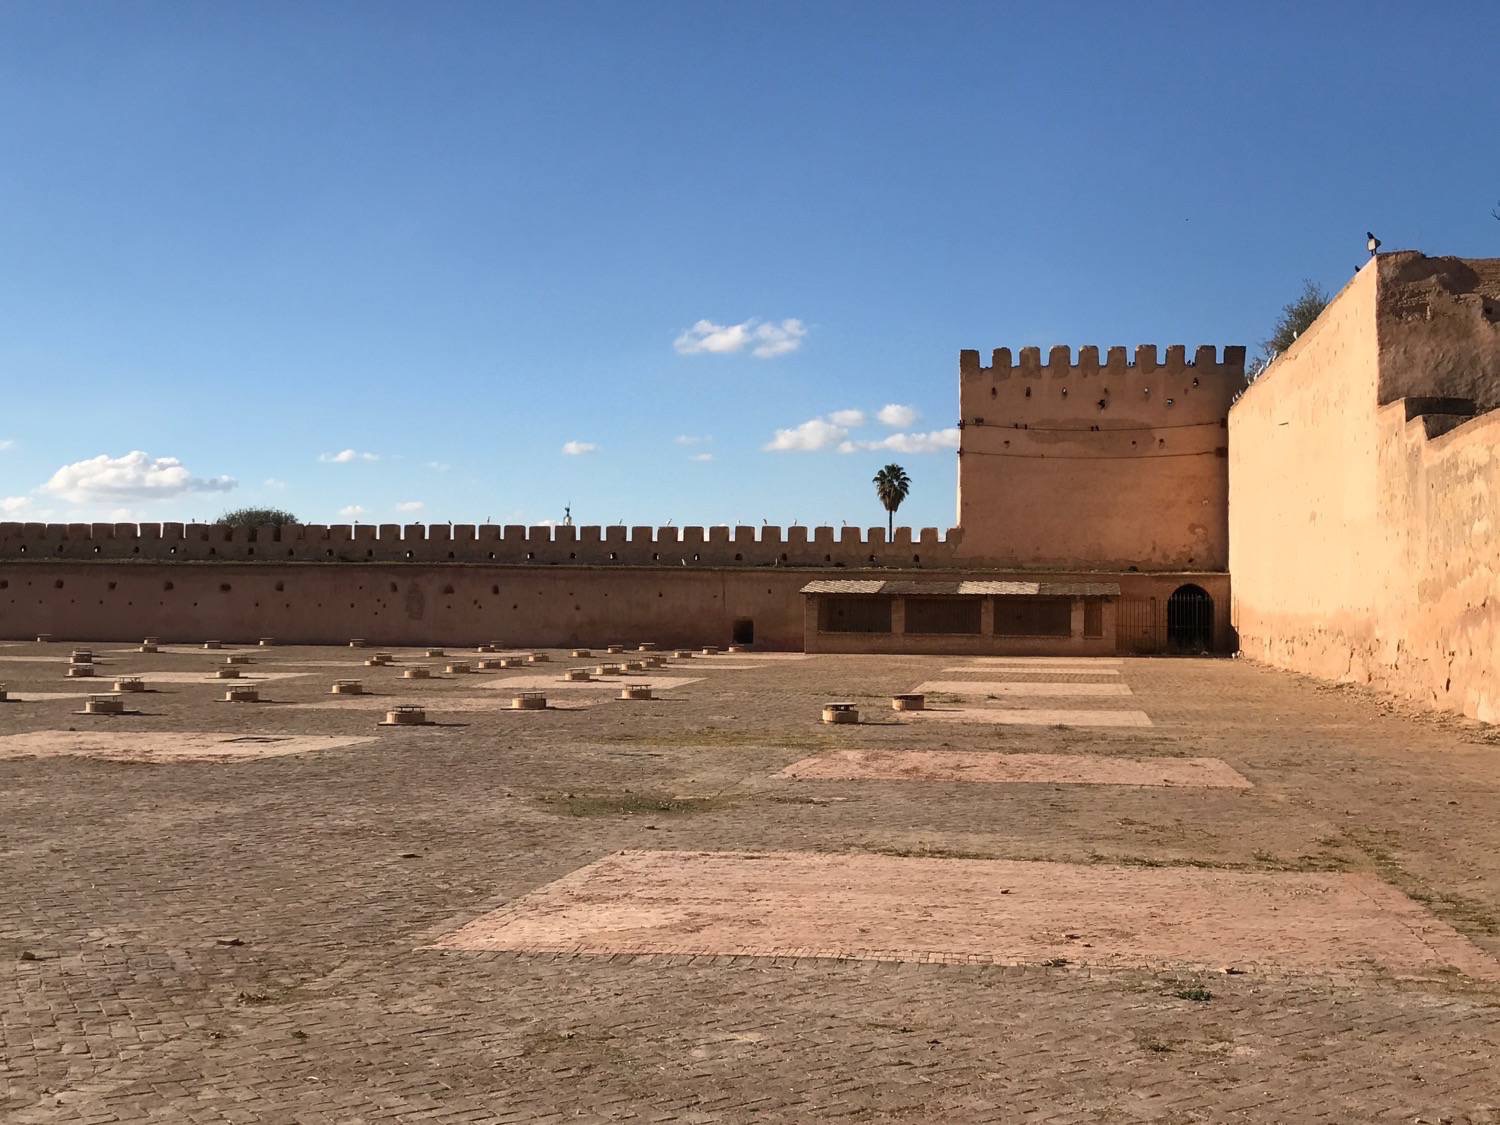 A section of the large plaza inside Moulay Ismail's complex.  This part shows one corner of the fortified remparts protecting this section of the city.  It also shows one of the  watch towers.  The circular structures punctuating the plaza are ventilation ducts for the prison cells below.  